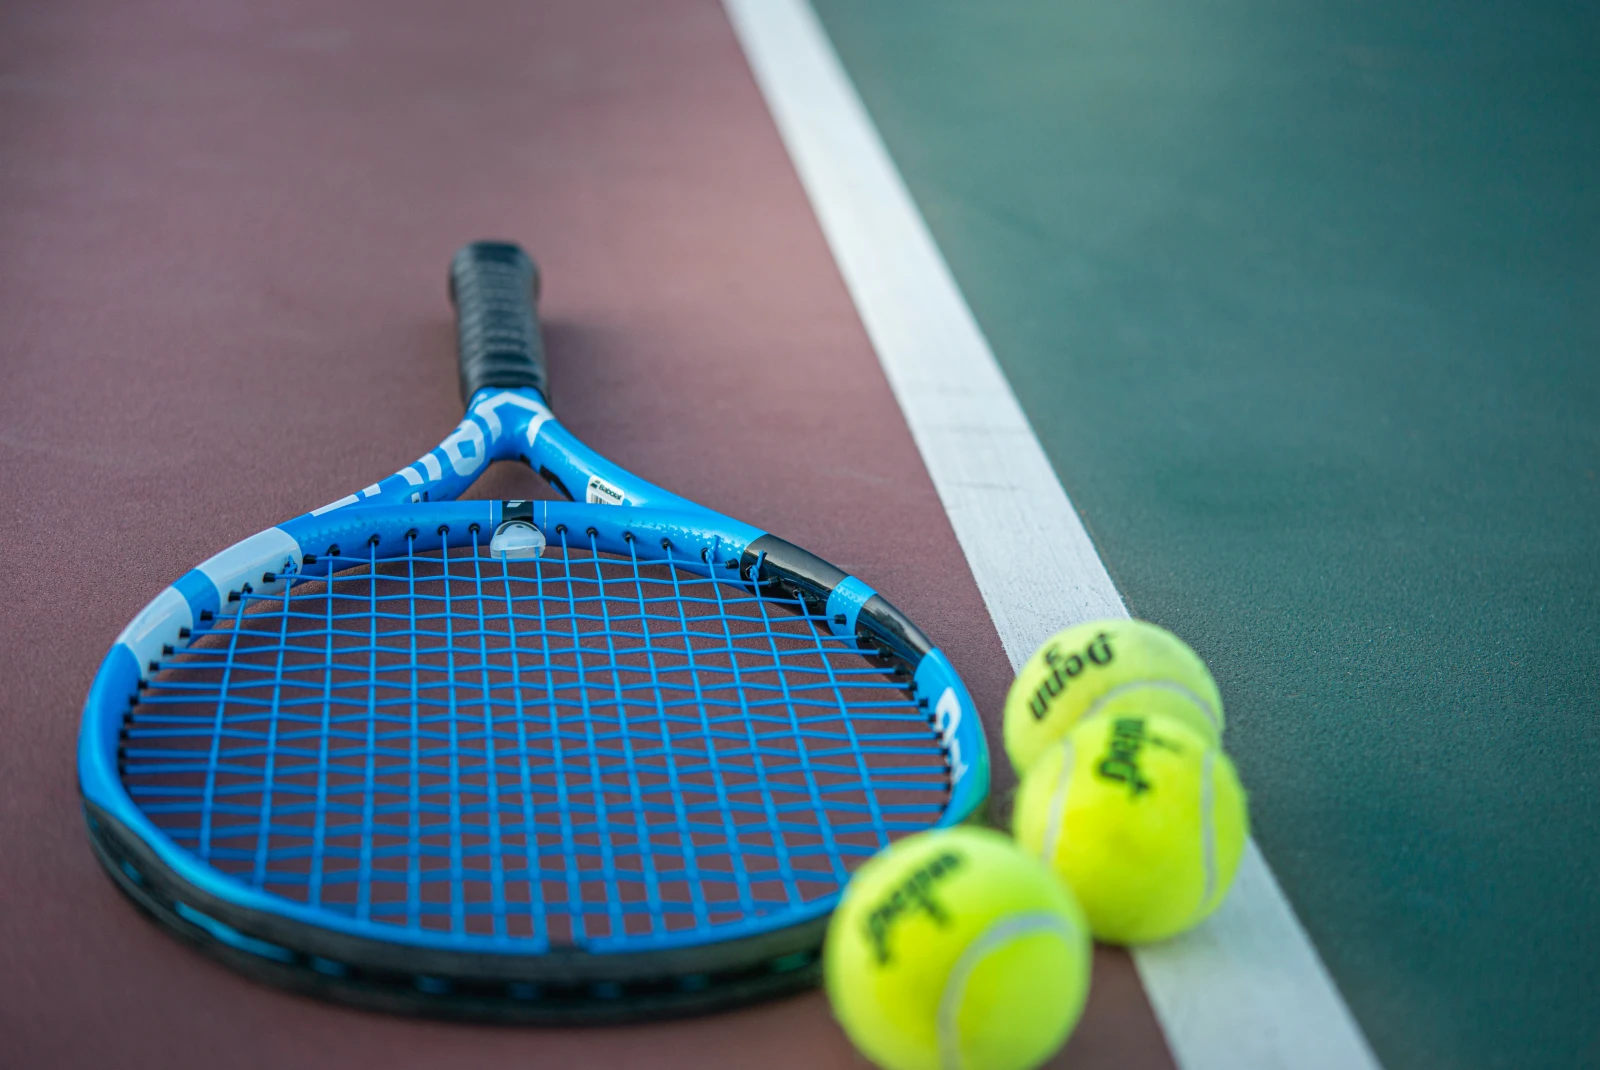 blue tennis racket on a court with two tennis balls